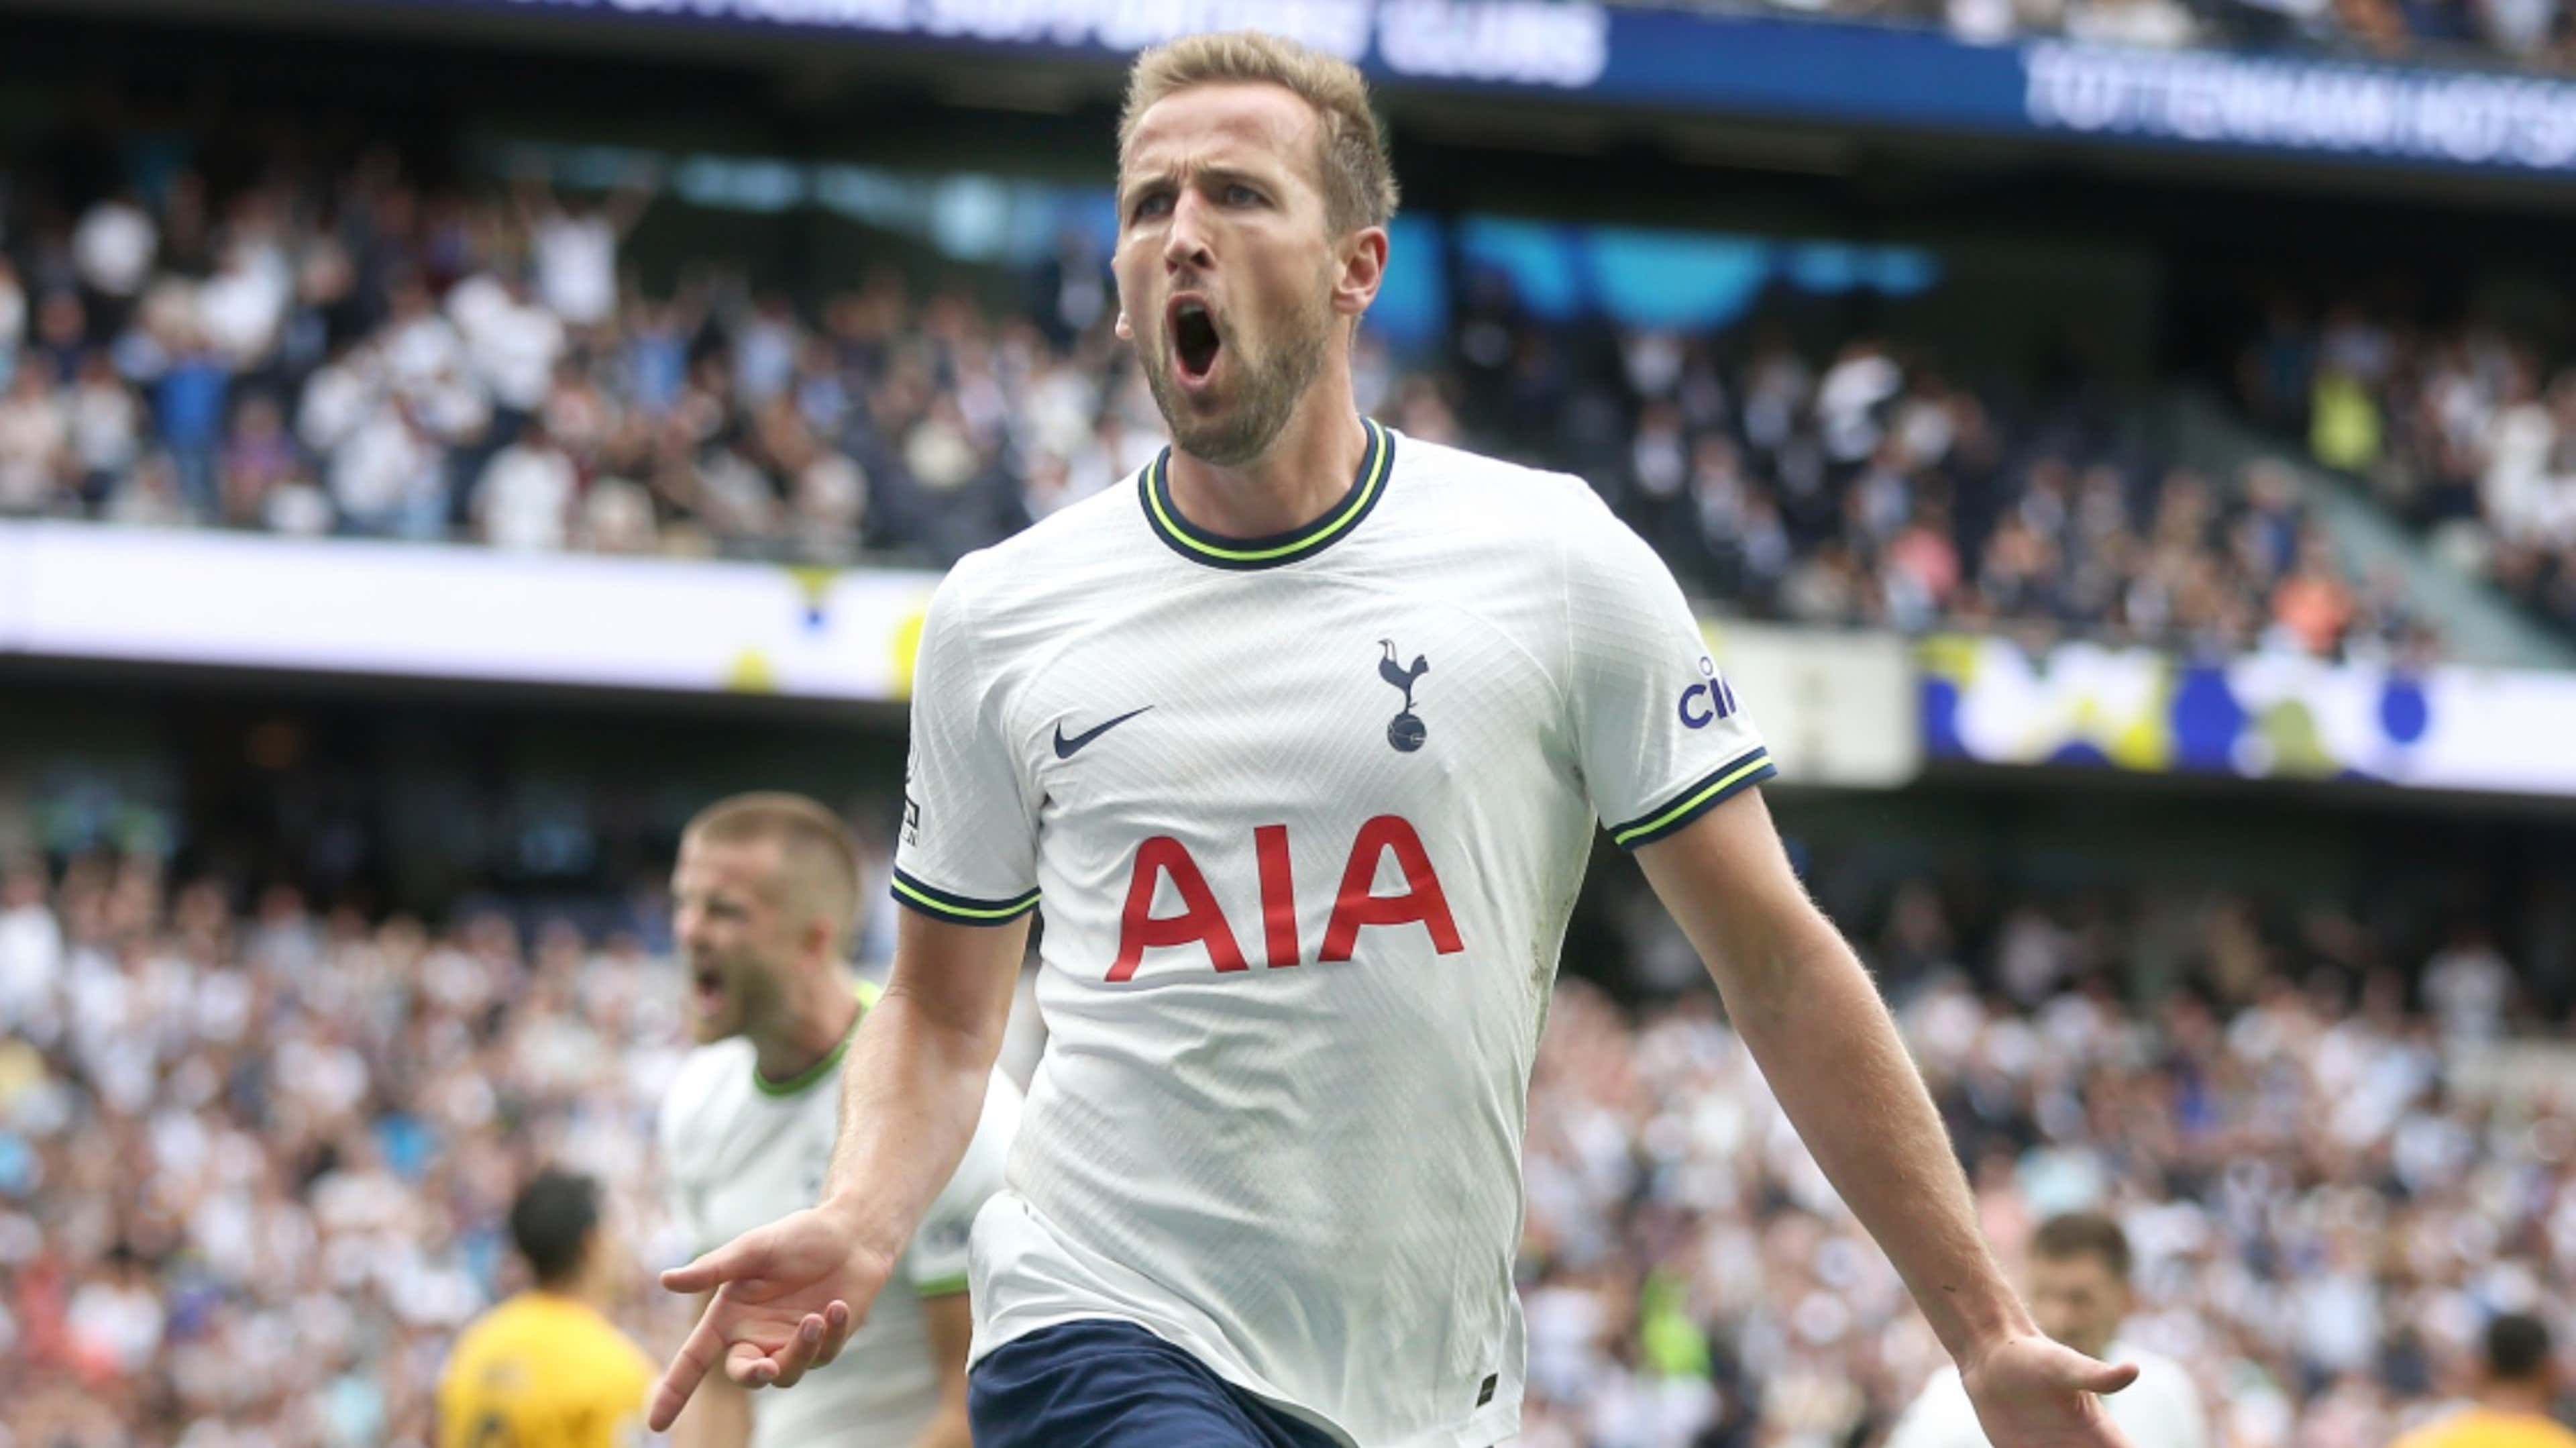 Tottenham vs Fulham highlights: Harry Kane adds to Pierre-Emile Hojbjerg  goal to seal win 